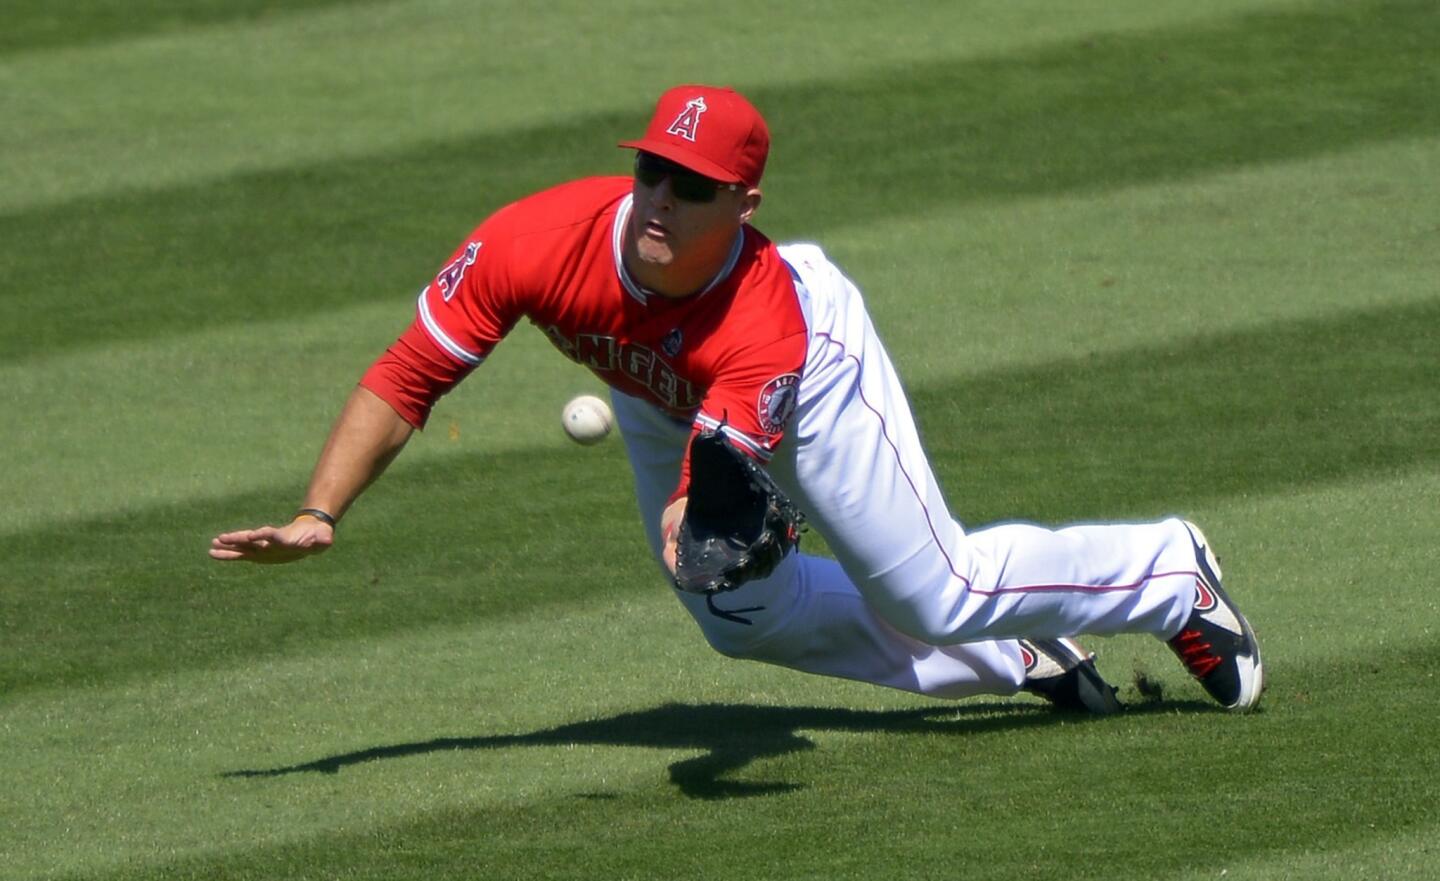 Mike Trout makes a diving catch